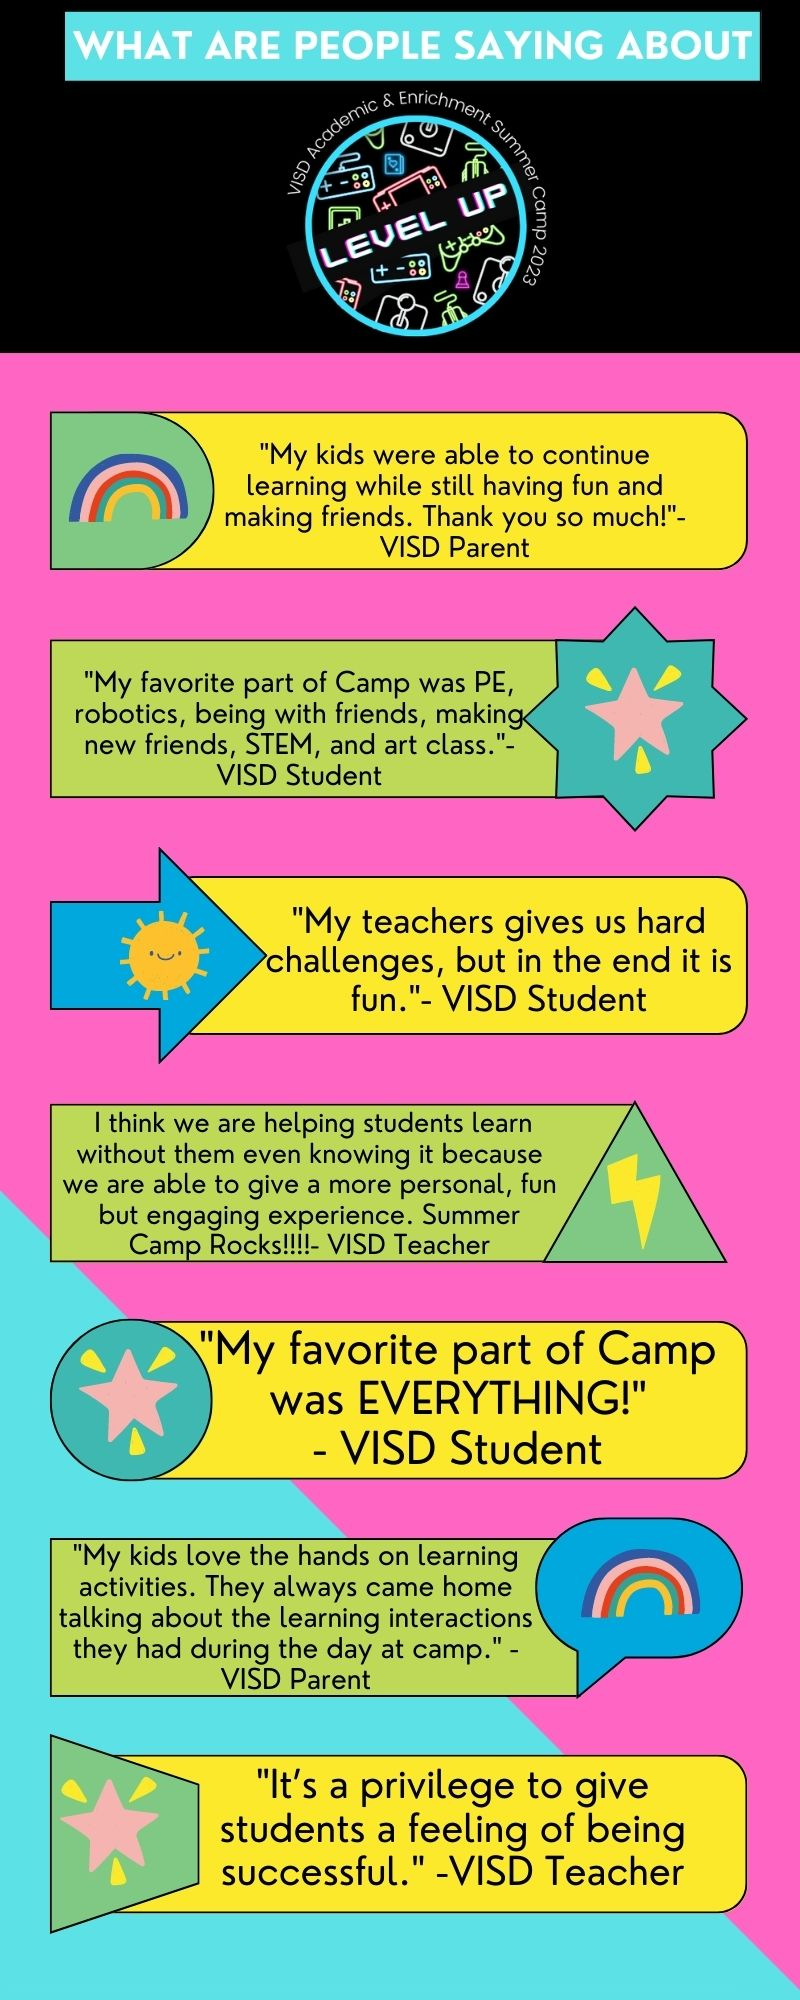 What are people saying about the VISD Summer Camp?  "My kids were able to continue learning while still having fun and making friends. Thank you so much!" VISD Parent.  "My favorite part of Camp was PE, robotics, being with friends, making new friends, STEM, and art class." VISD Student.  "My teacher gives us hard challenges, but in the end it is fun." VISD Student. "I think we are helping students learn without them even knowing it because we are able to give a more personal, fun, but engaging experience. Summer Camp Rocks!!!" VISD Teacher.  "My Favorite part of Camp was EVERYTHING!" VISD student. "My kids love the hands on learning activities. They always came home talking about the learning interactions they had during the day at camp." VISD parent. "It is a privilege to give students a feeling of being successful." VISD teacher.